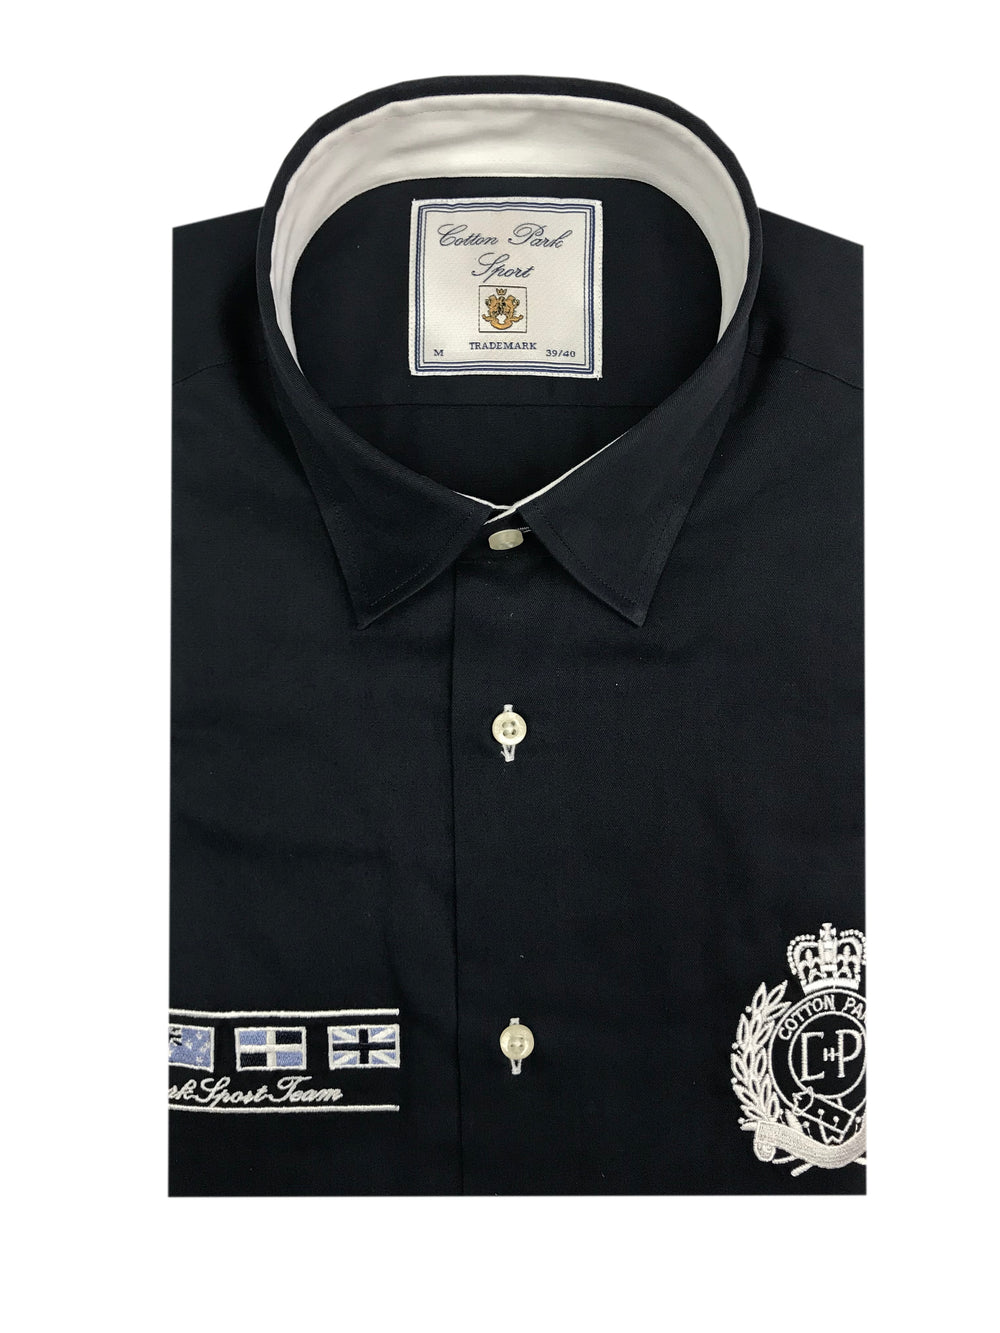 Sporty chic navy blue shirt with white embroidery